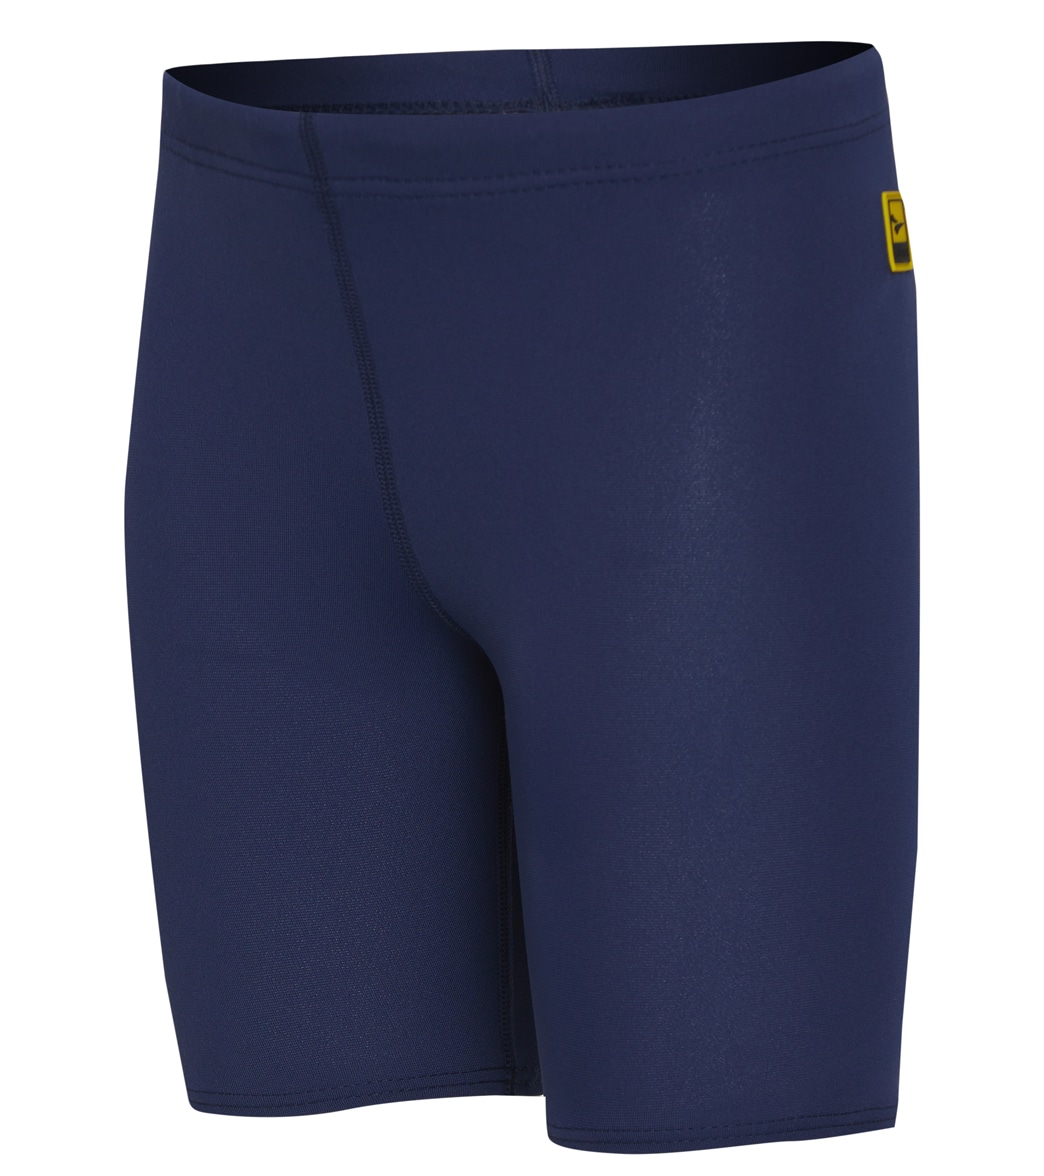 Finis Boys' Solid Jammer Swimsuit - Navy 20 - Swimoutlet.com